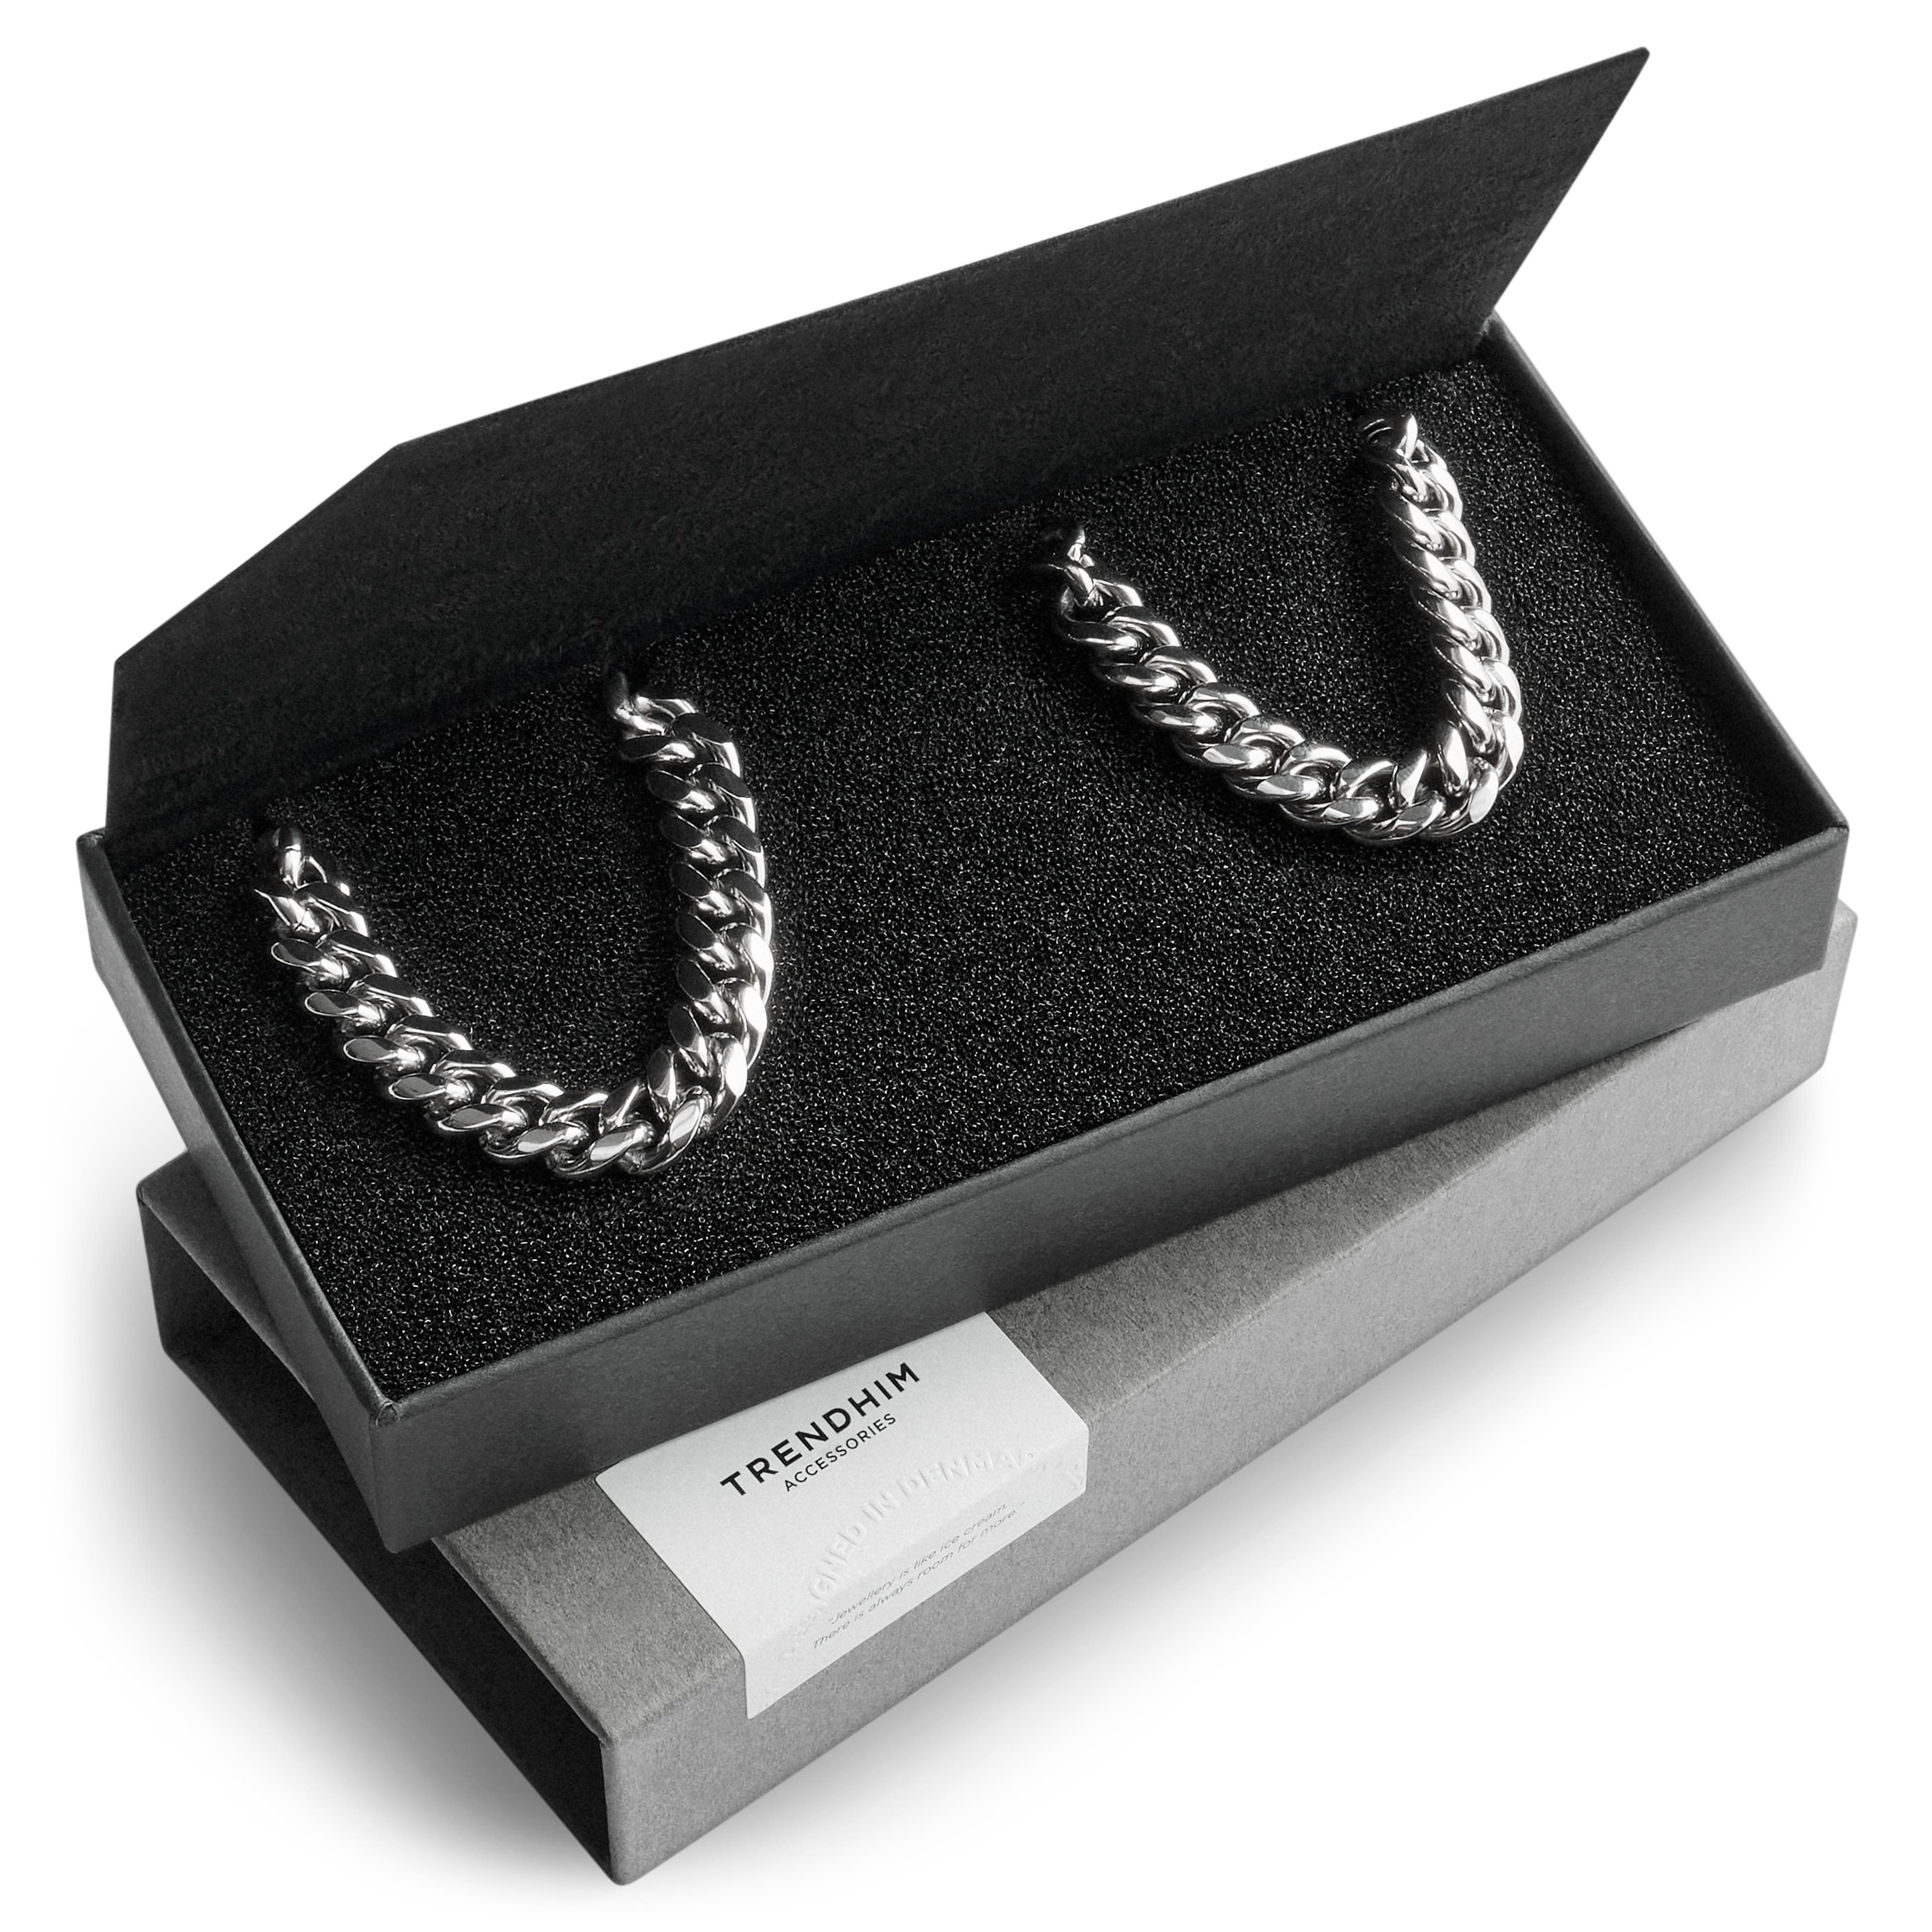 8 mm Surgical Steel Chain Bracelet & Necklace Gift Box